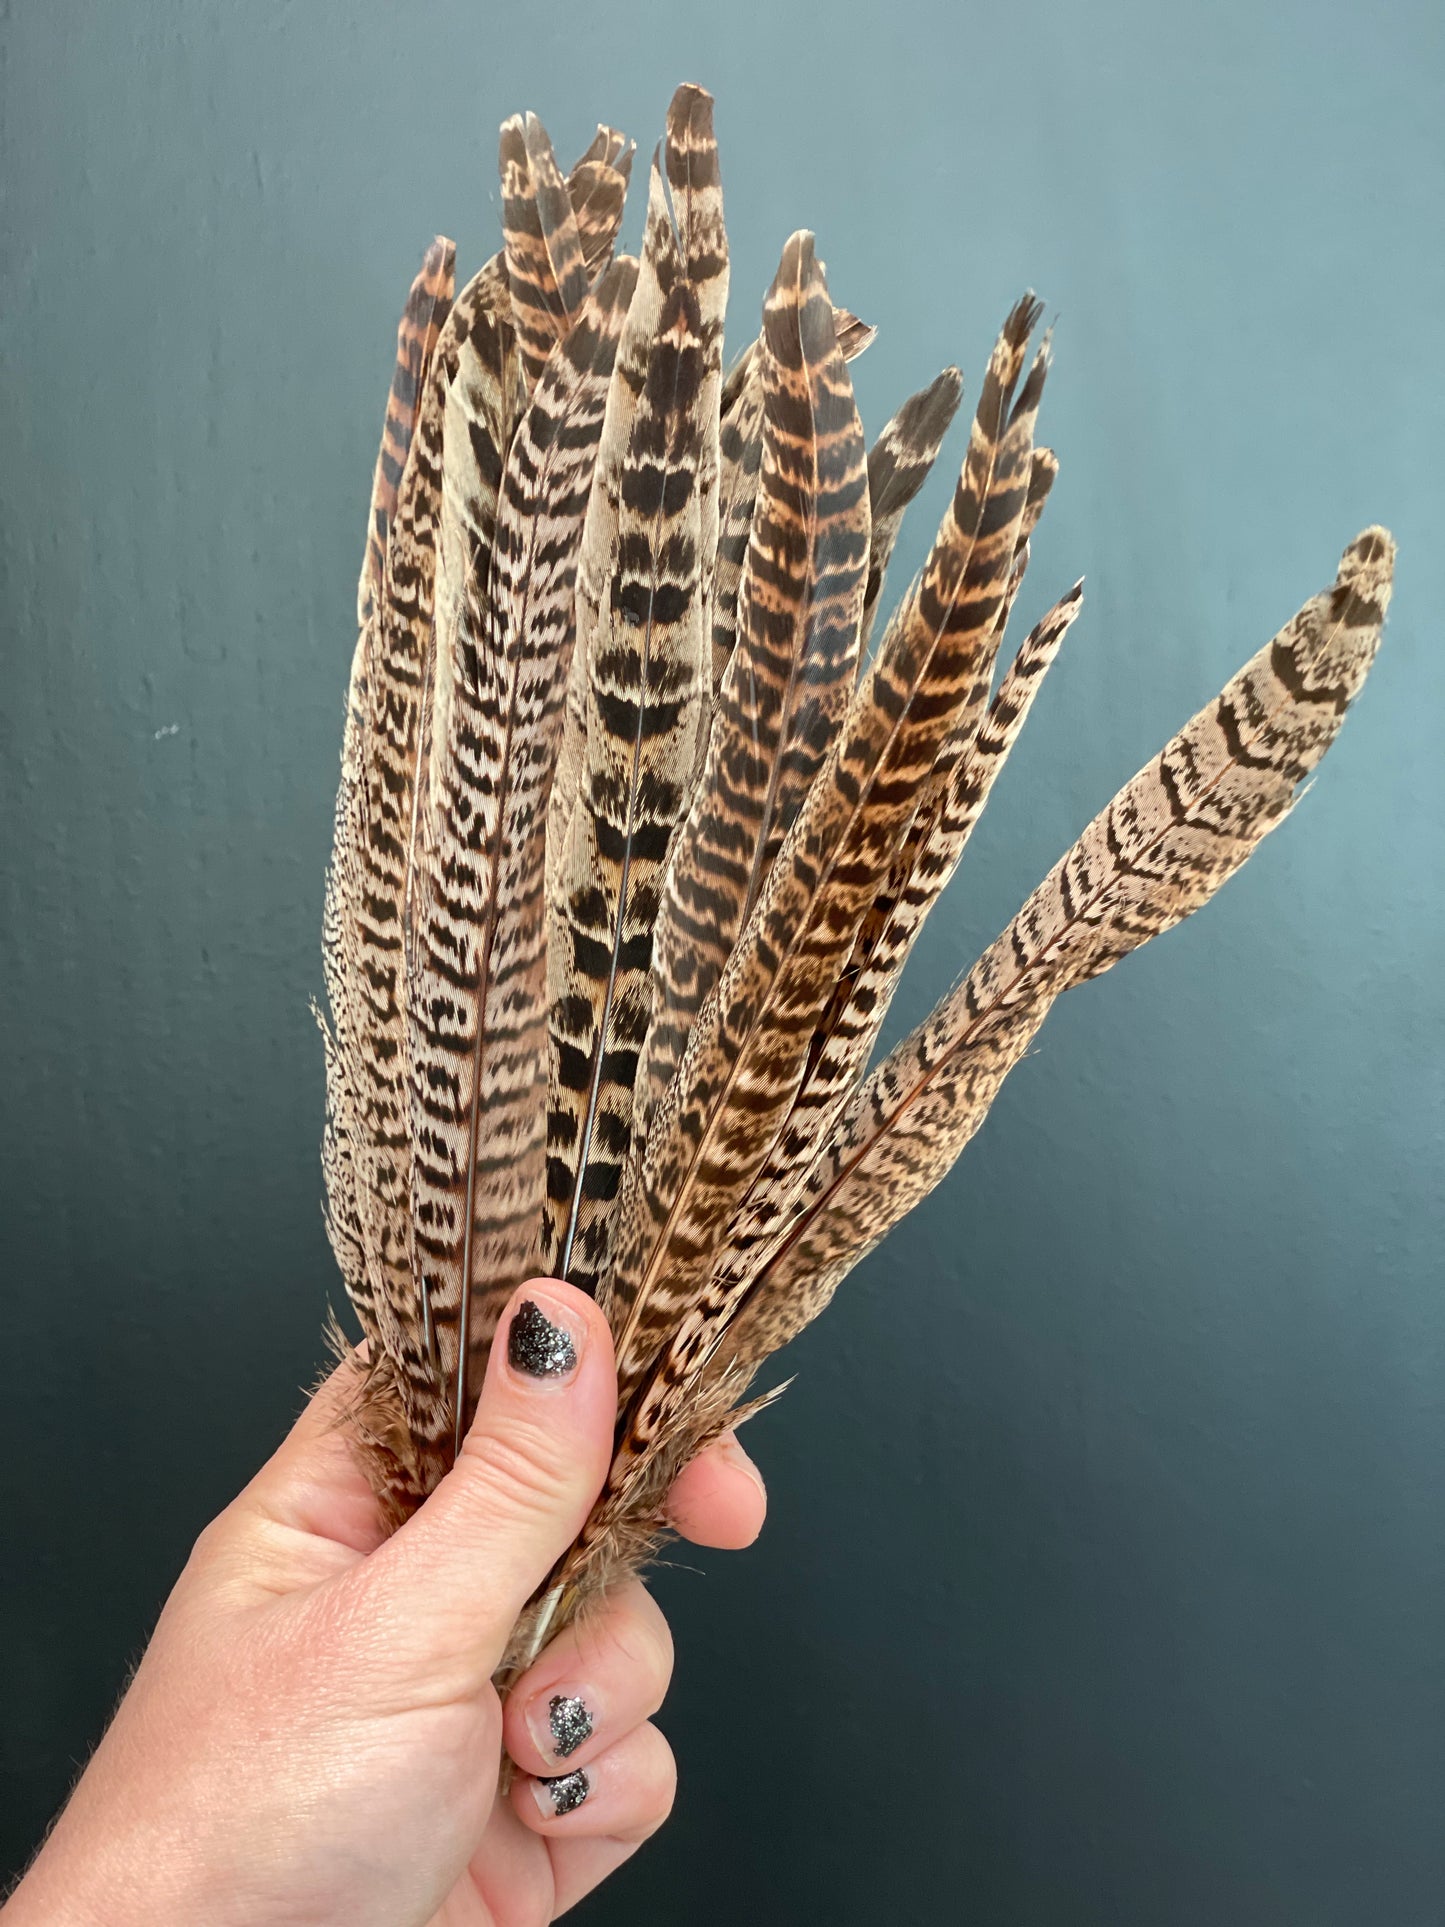 Ring-necked Pheasant Feathers Puffed Up Photograph by Lois Lake - Pixels